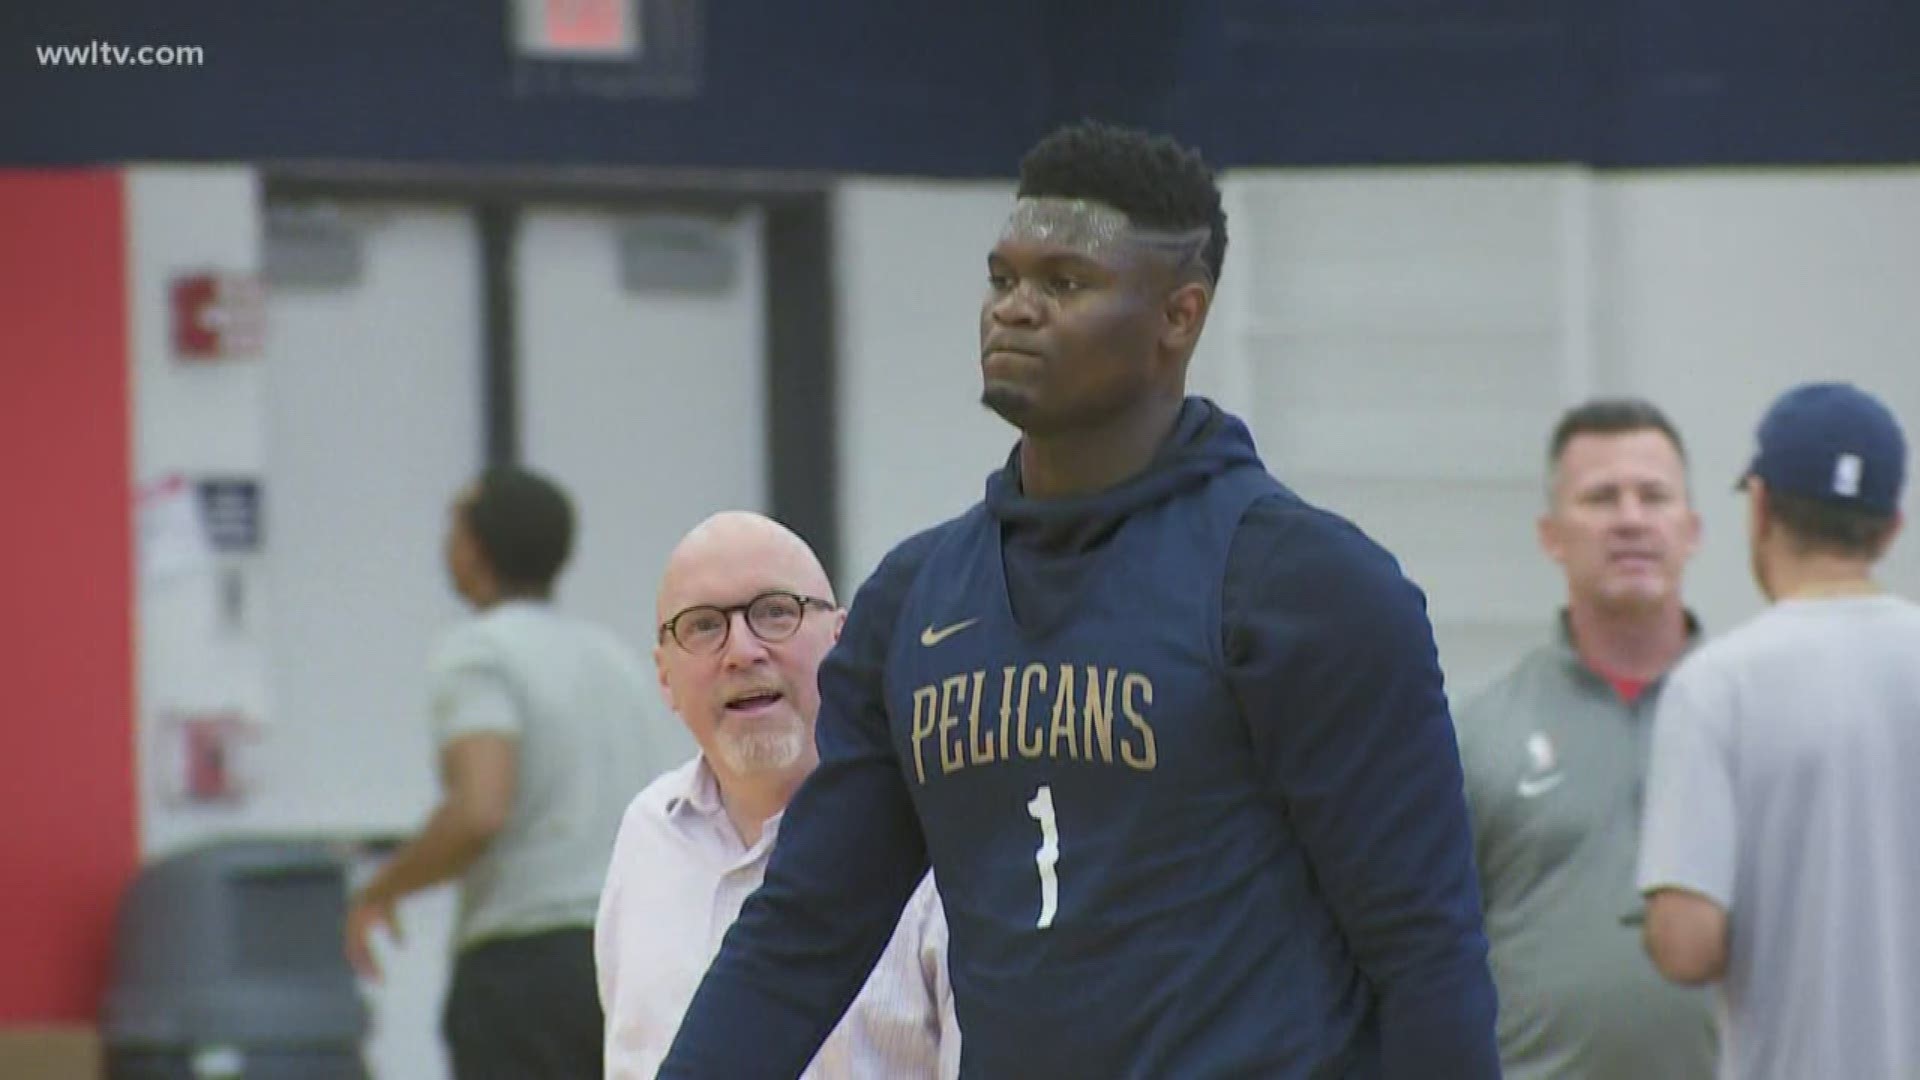 Zion Williamson is expected to finally take the floor for the Pelicans next week when the team hosts the San Antonio Spurs on Jan. 22.